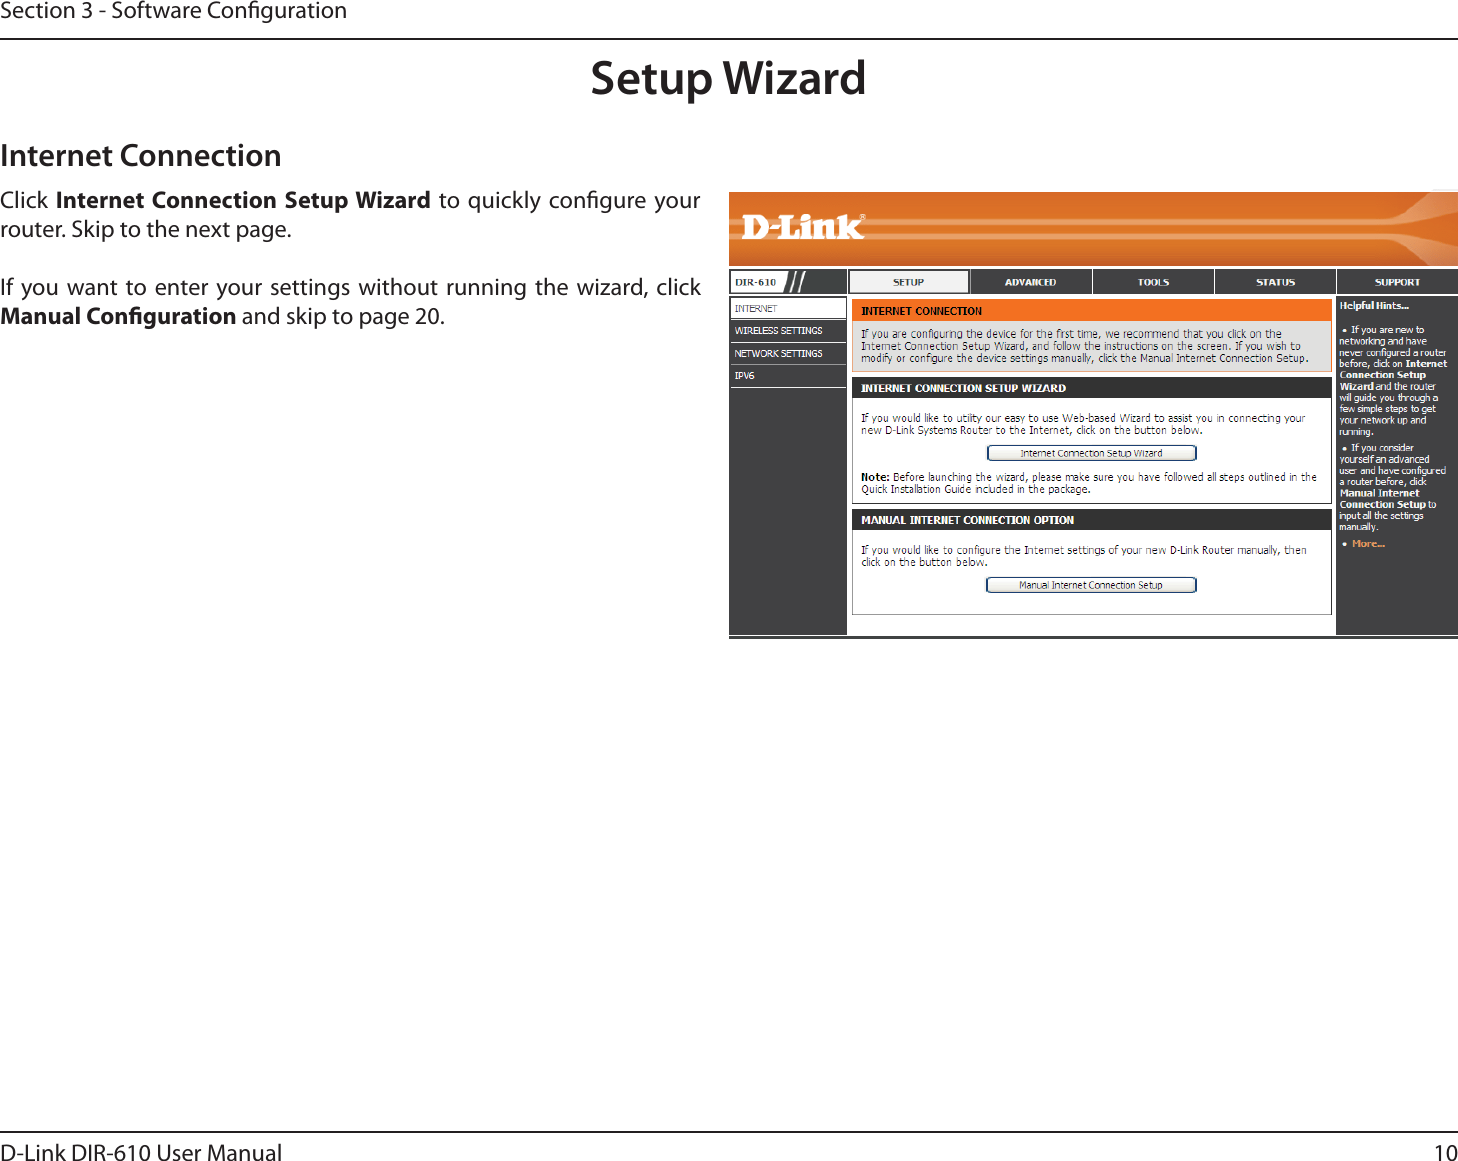 10D-Link DIR-610 User ManualSection 3 - Software CongurationSetup WizardClick Internet Connection Setup Wizard to quickly congure your router. Skip to the next page. If you want to enter your settings without running the wizard, click Manual Conguration and skip to page 20.Internet Connection